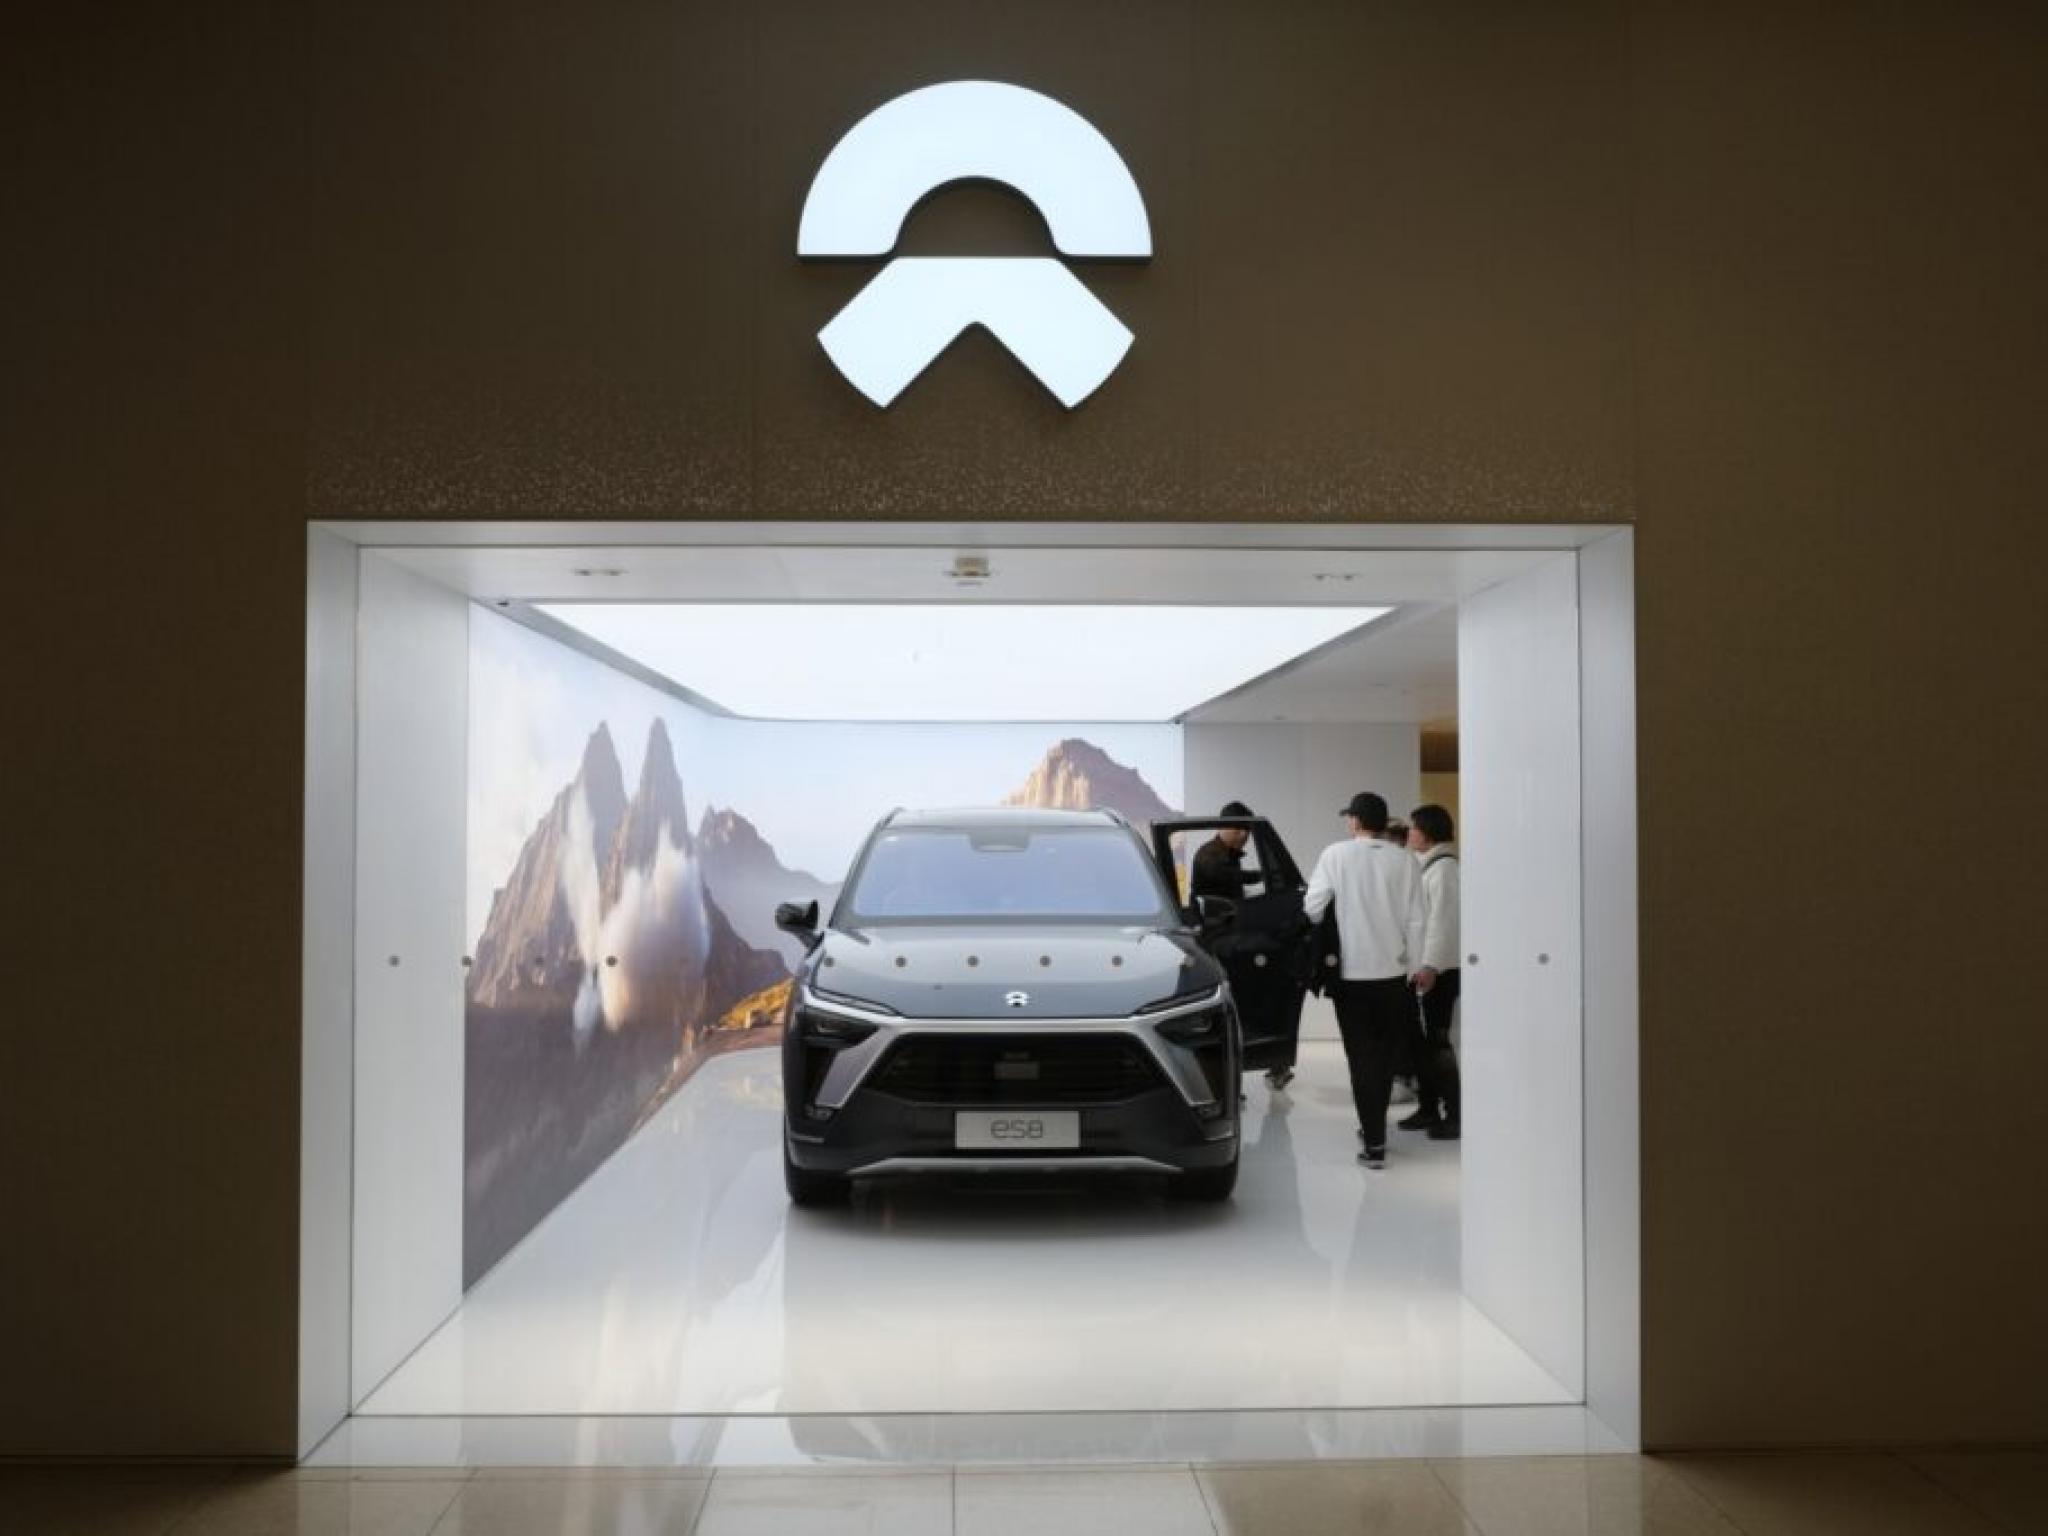  nio-xpeng-take-twice-as-long-as-tesla-to-pay-suppliers-whats-ailing-chinese-ev-makers 